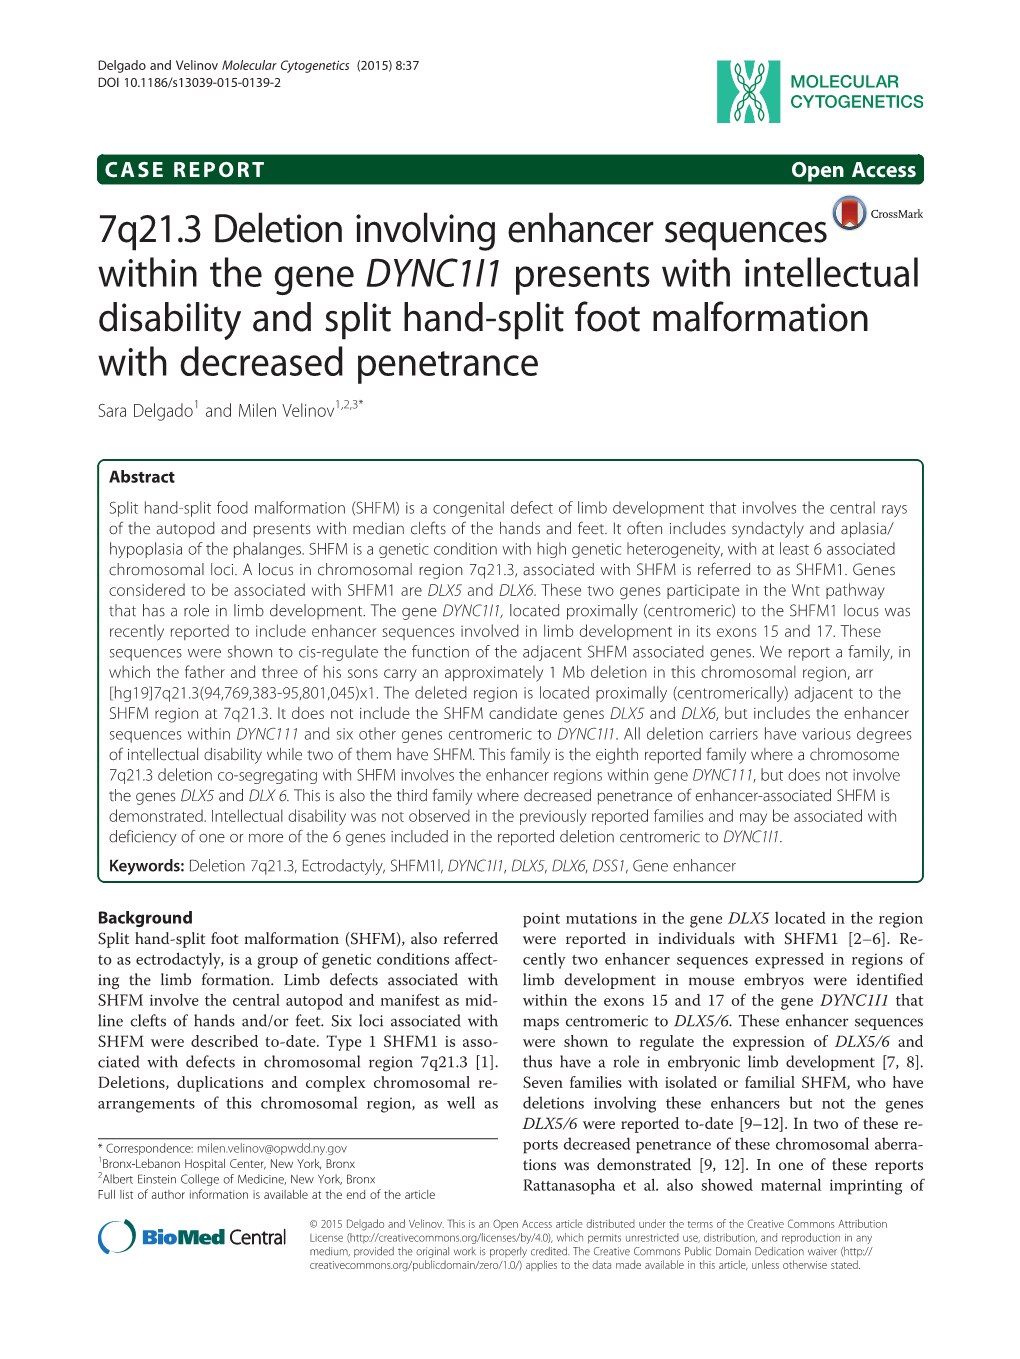 7Q21.3 Deletion Involving Enhancer Sequences Within the Gene